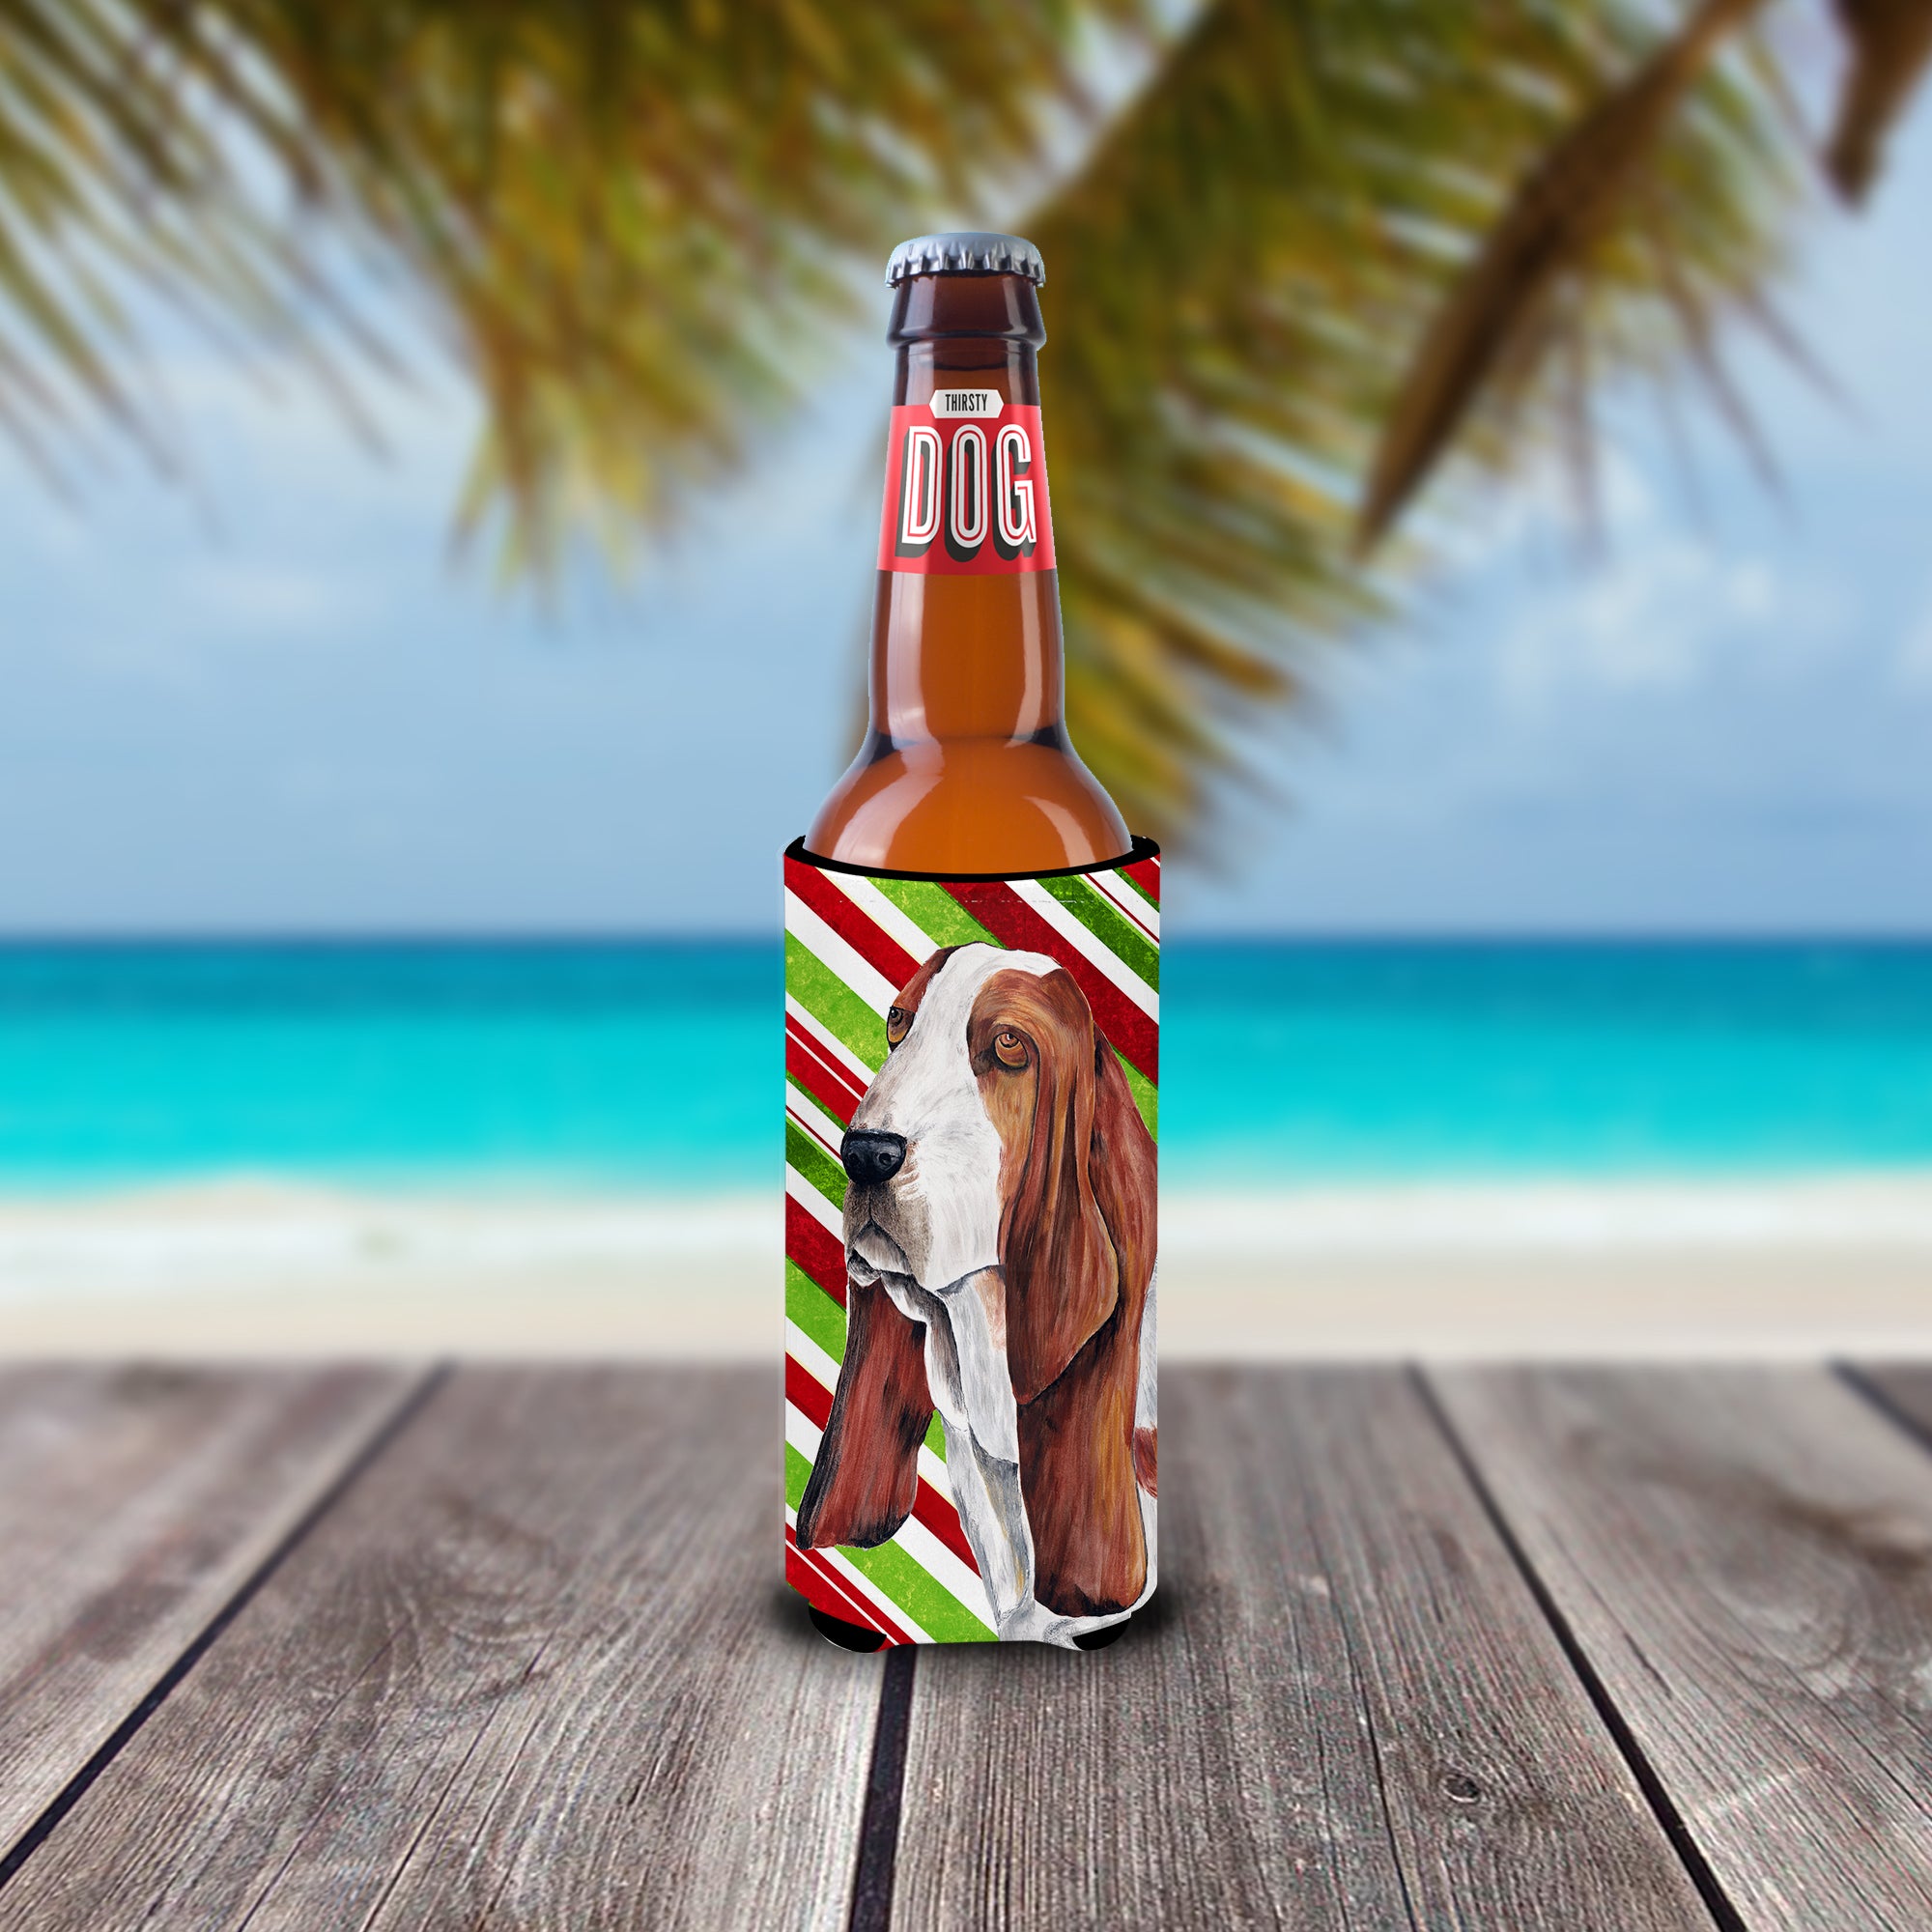 Basset Hound Candy Cane Holiday Christmas Ultra Beverage Isolateurs pour canettes minces SC9332MUK